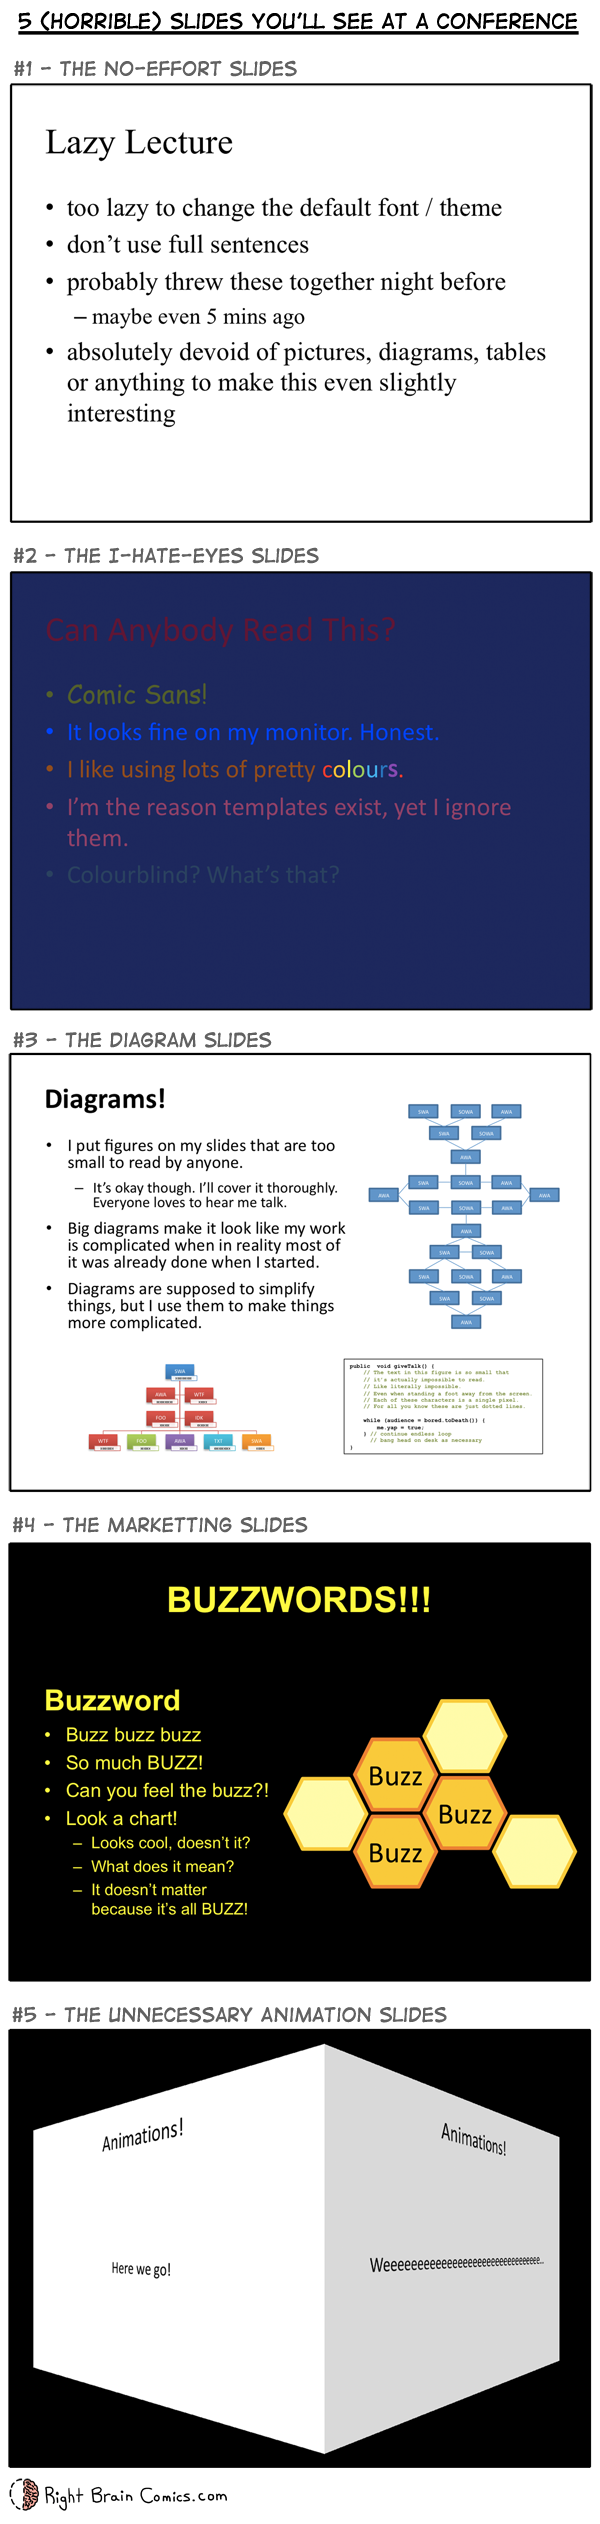 50 – 5 (Horrible) Slides You’ll See at a Conference